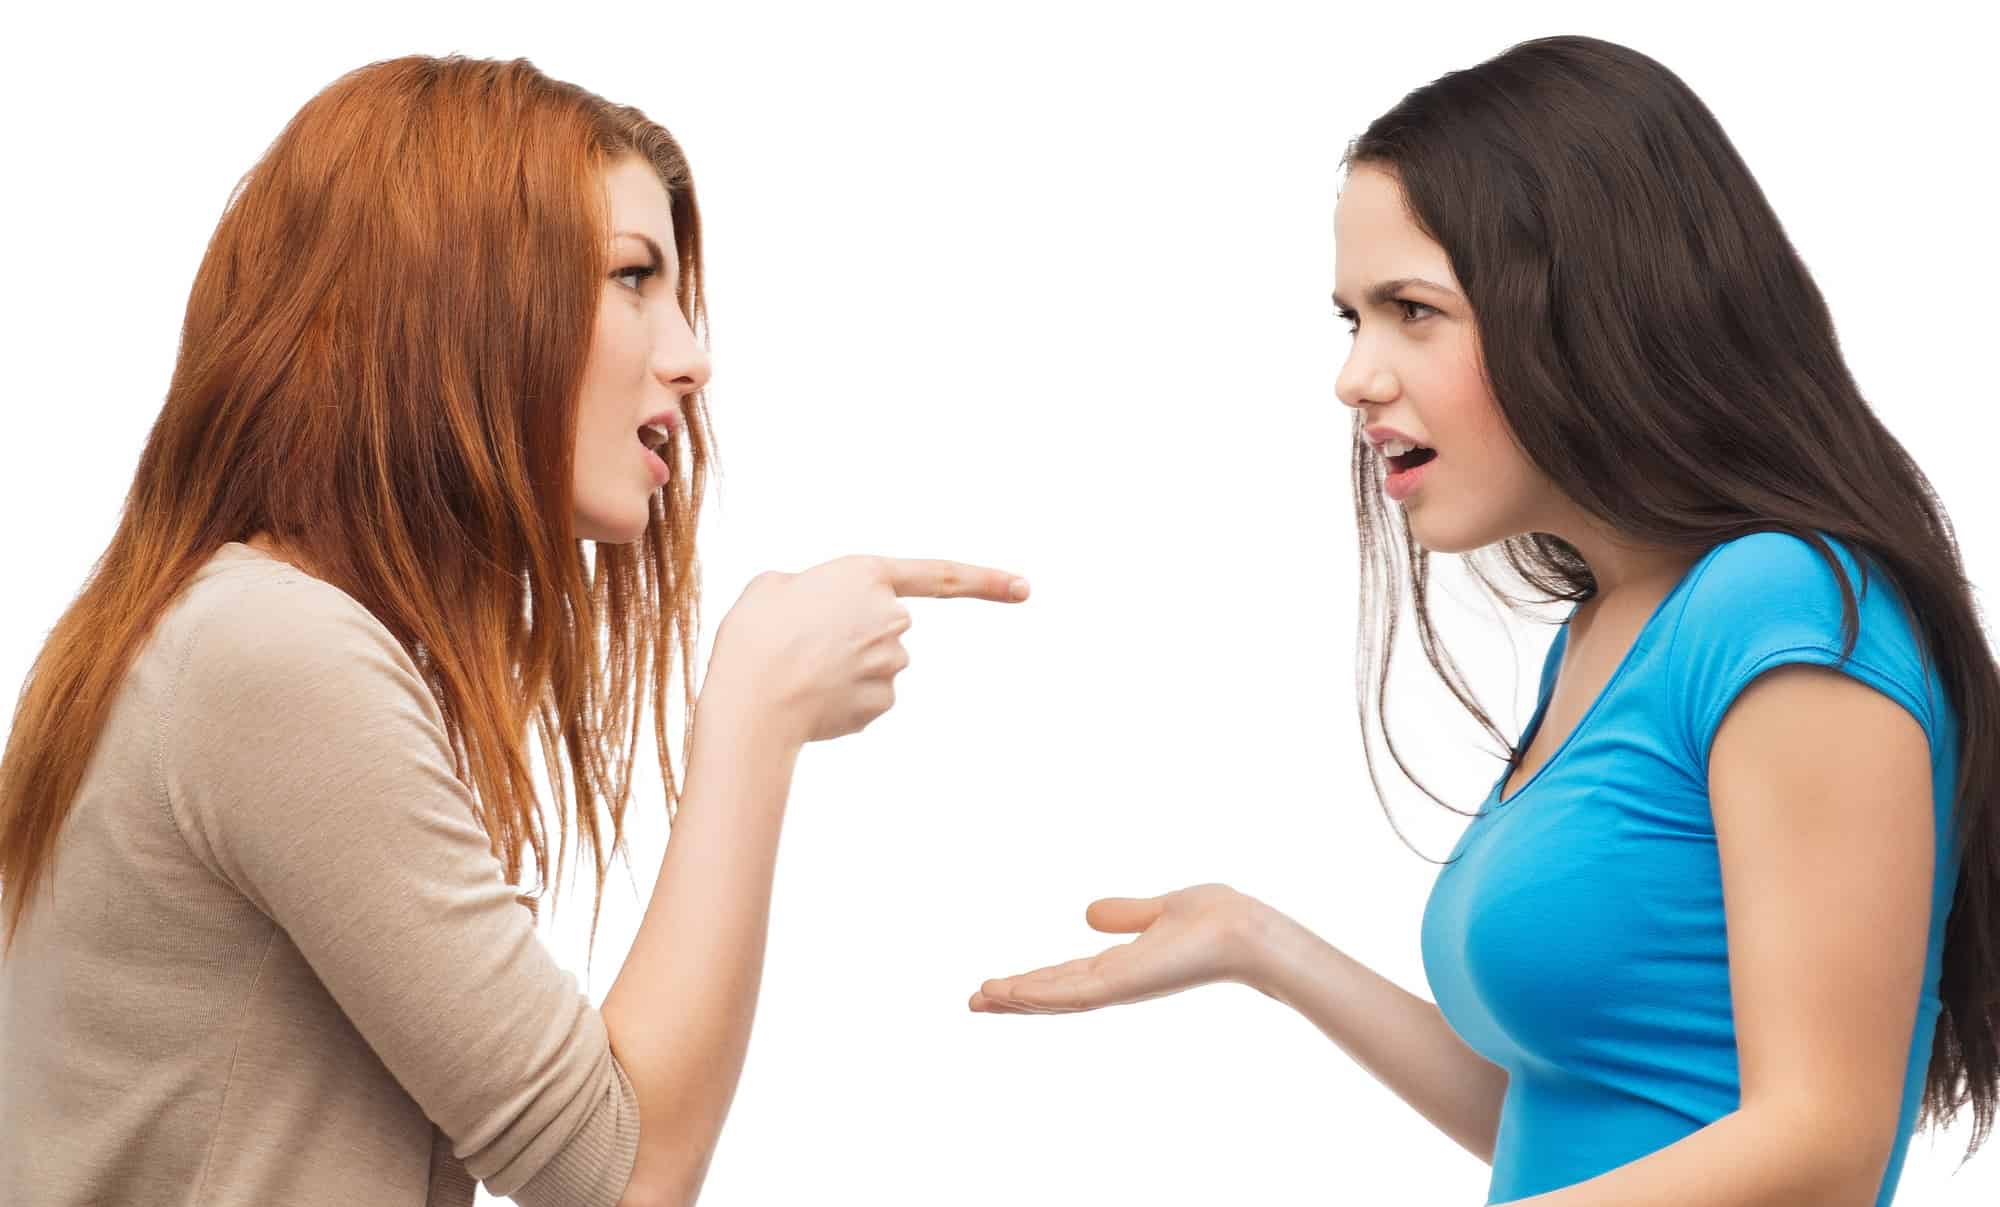 Two women pointing at each other with their hands